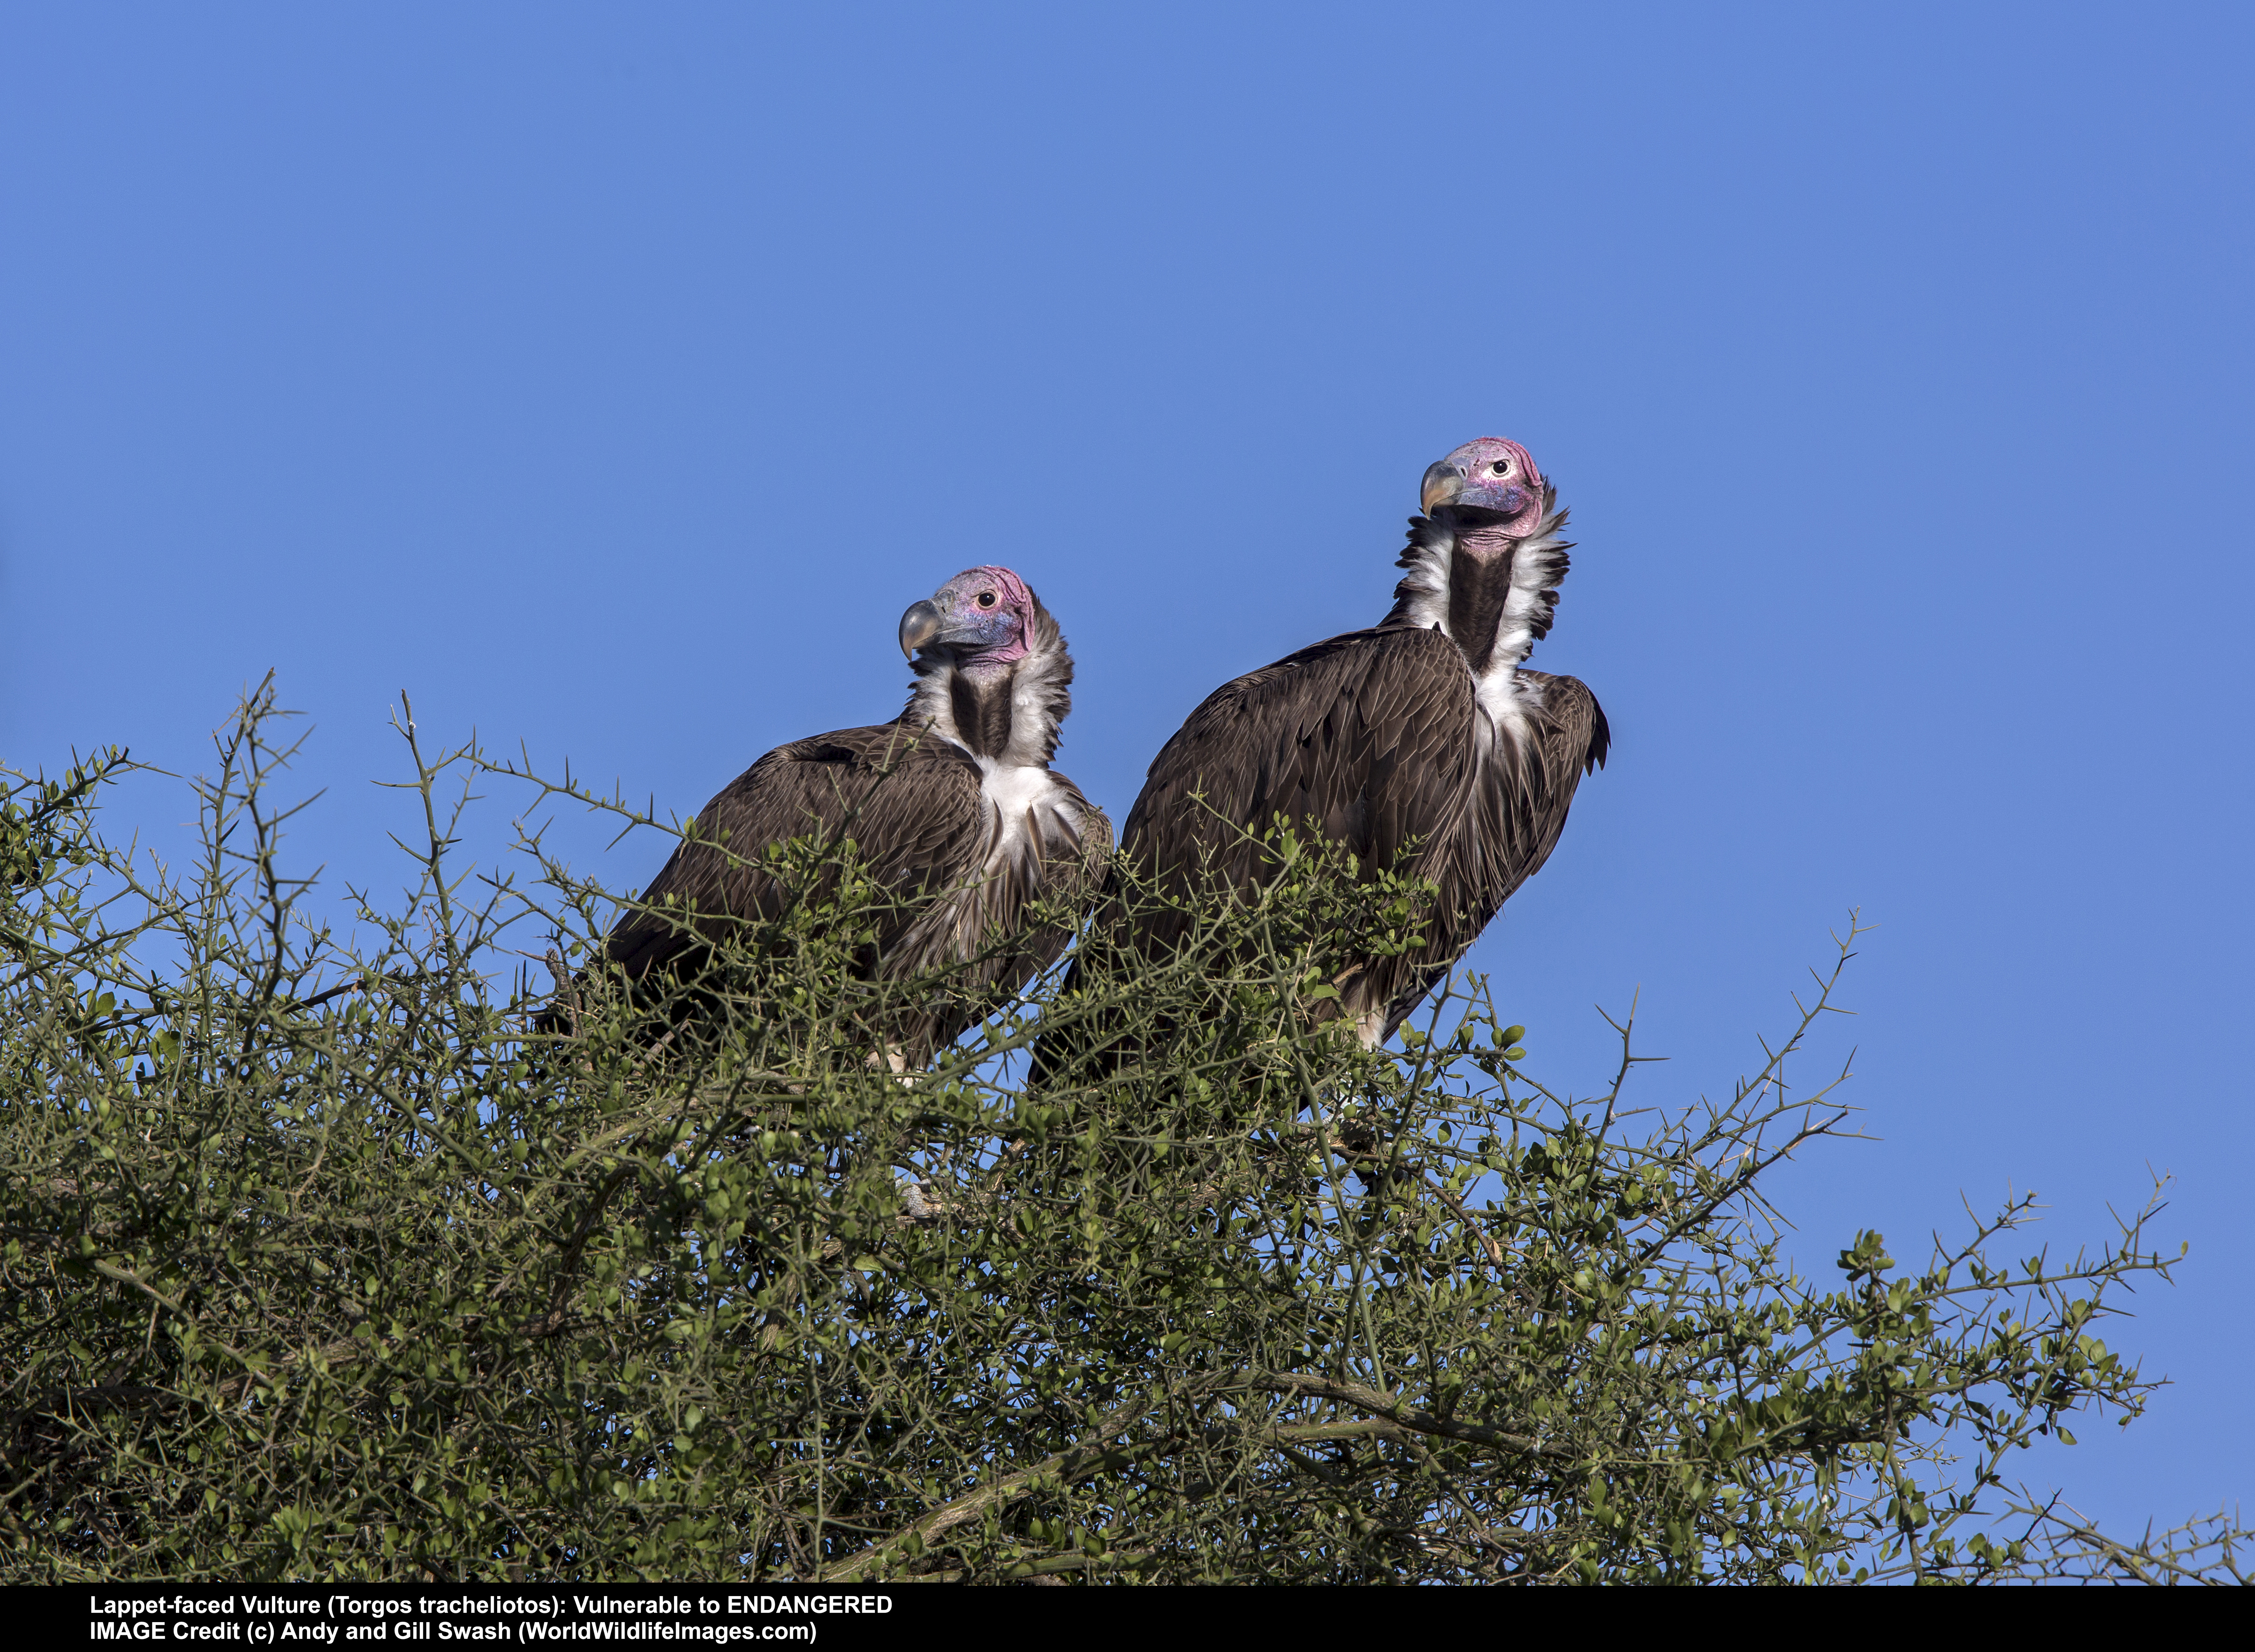 Vultures mostly forage outside protected areas; conservation